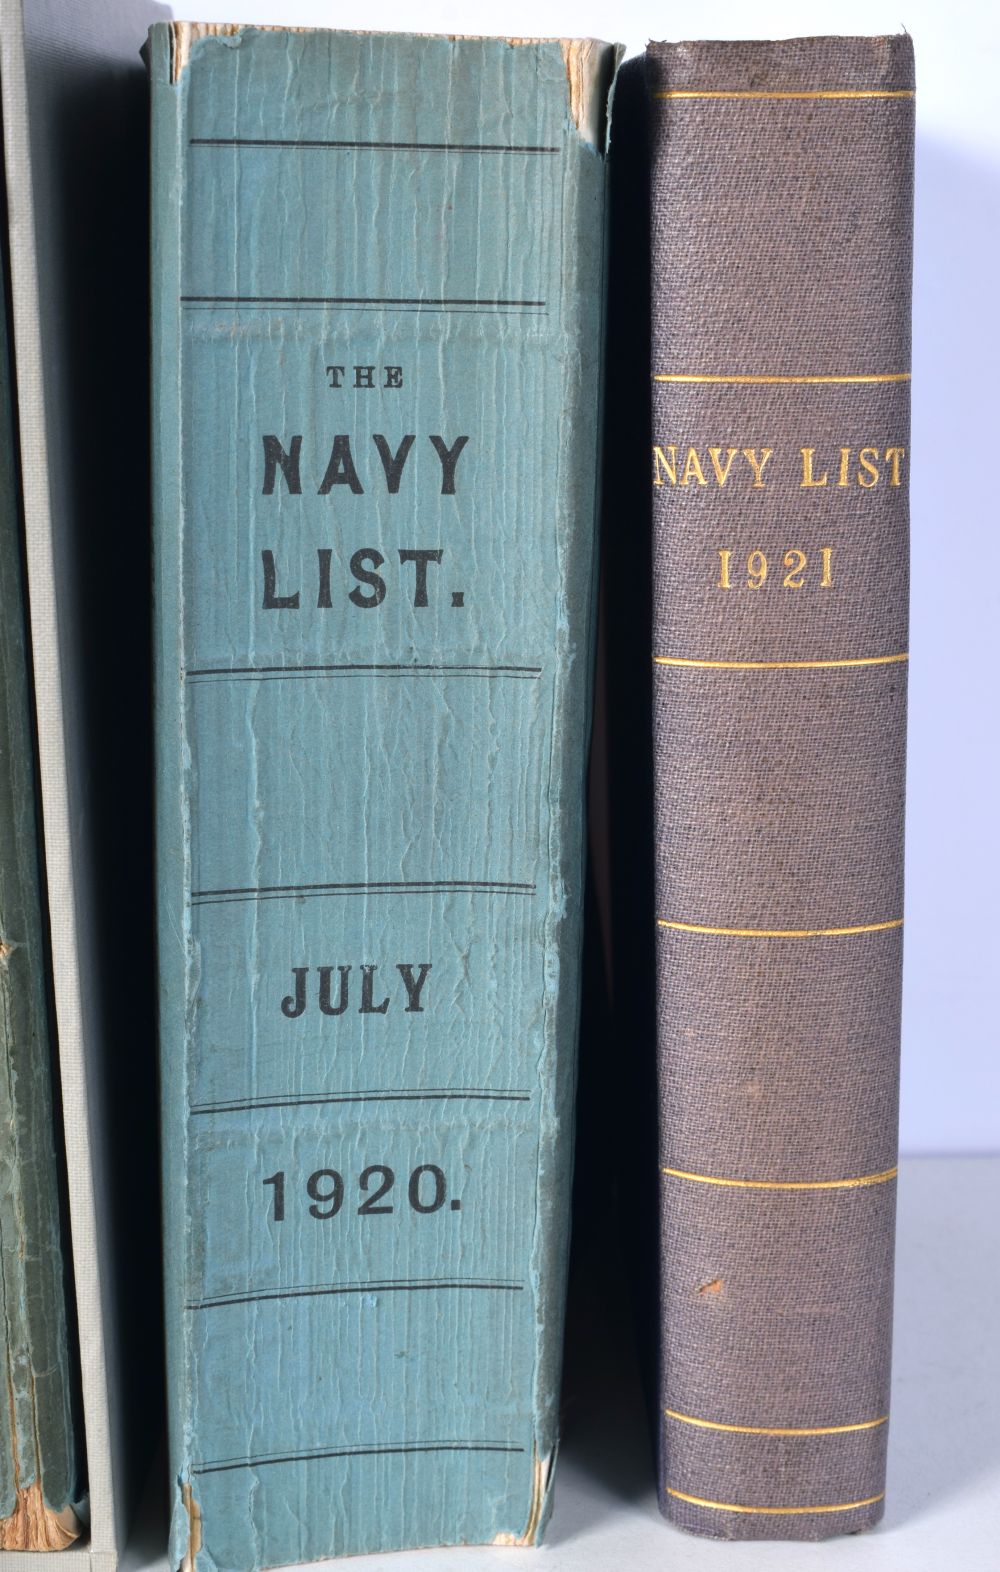 A collection of books related to "The Navy list " post WWall 1 1919-1921. (4). - Image 8 of 8